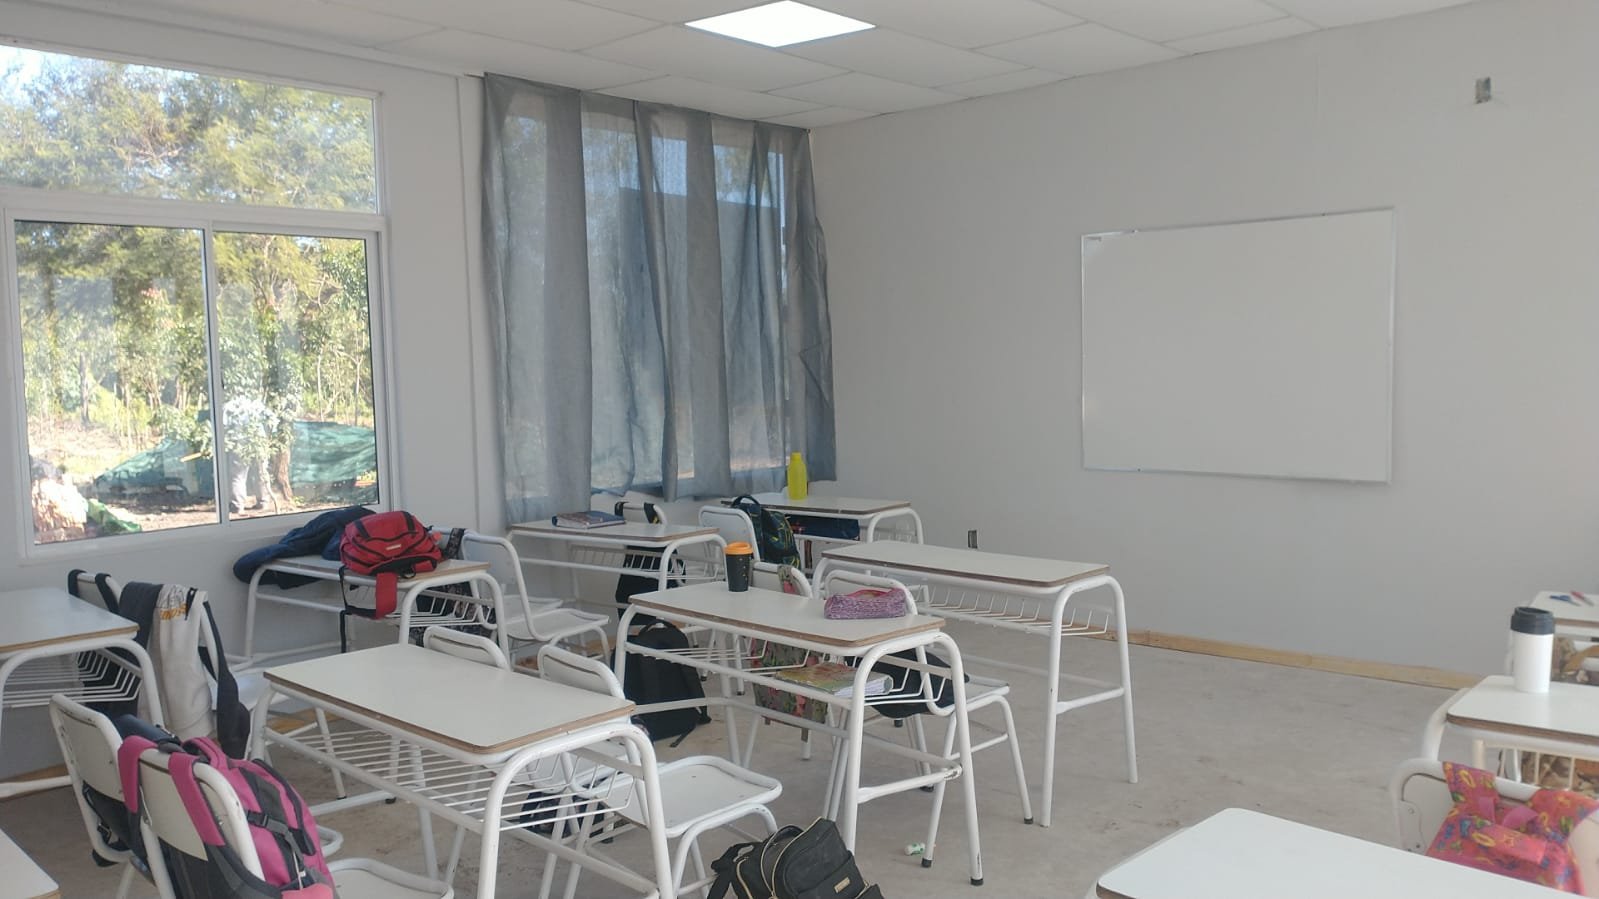  Finished Classroom 